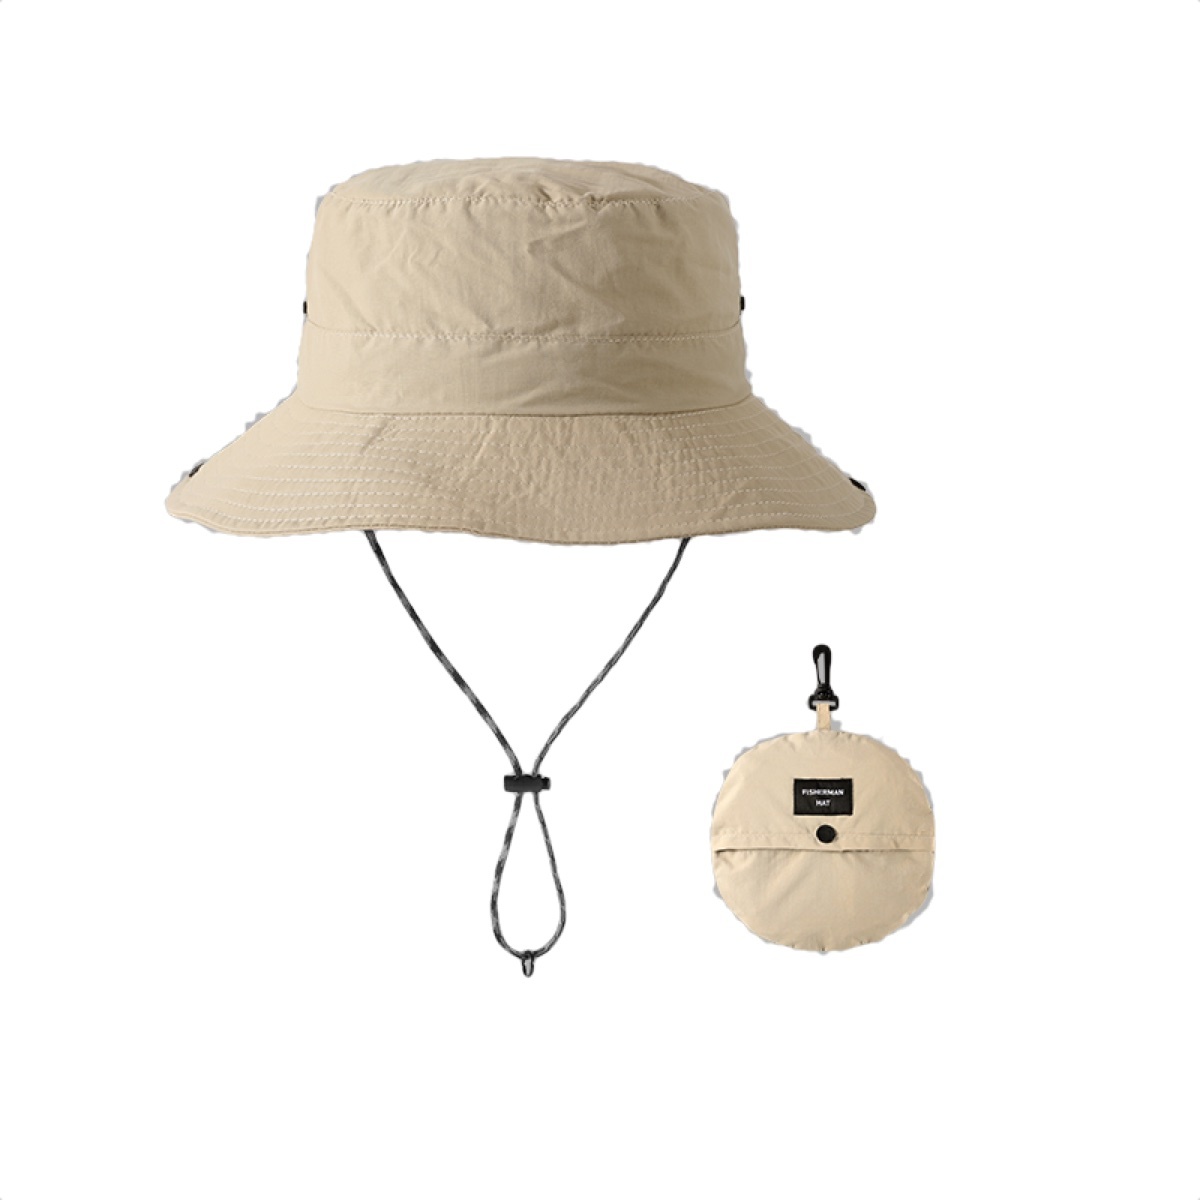 Sun Hat, Fishing Hat for Men and Women, Boonie Hat, Foldable, Quick Dry, Lightweight, Adjustable Size 20”-23” (52 - 58 cm) - Beige-2